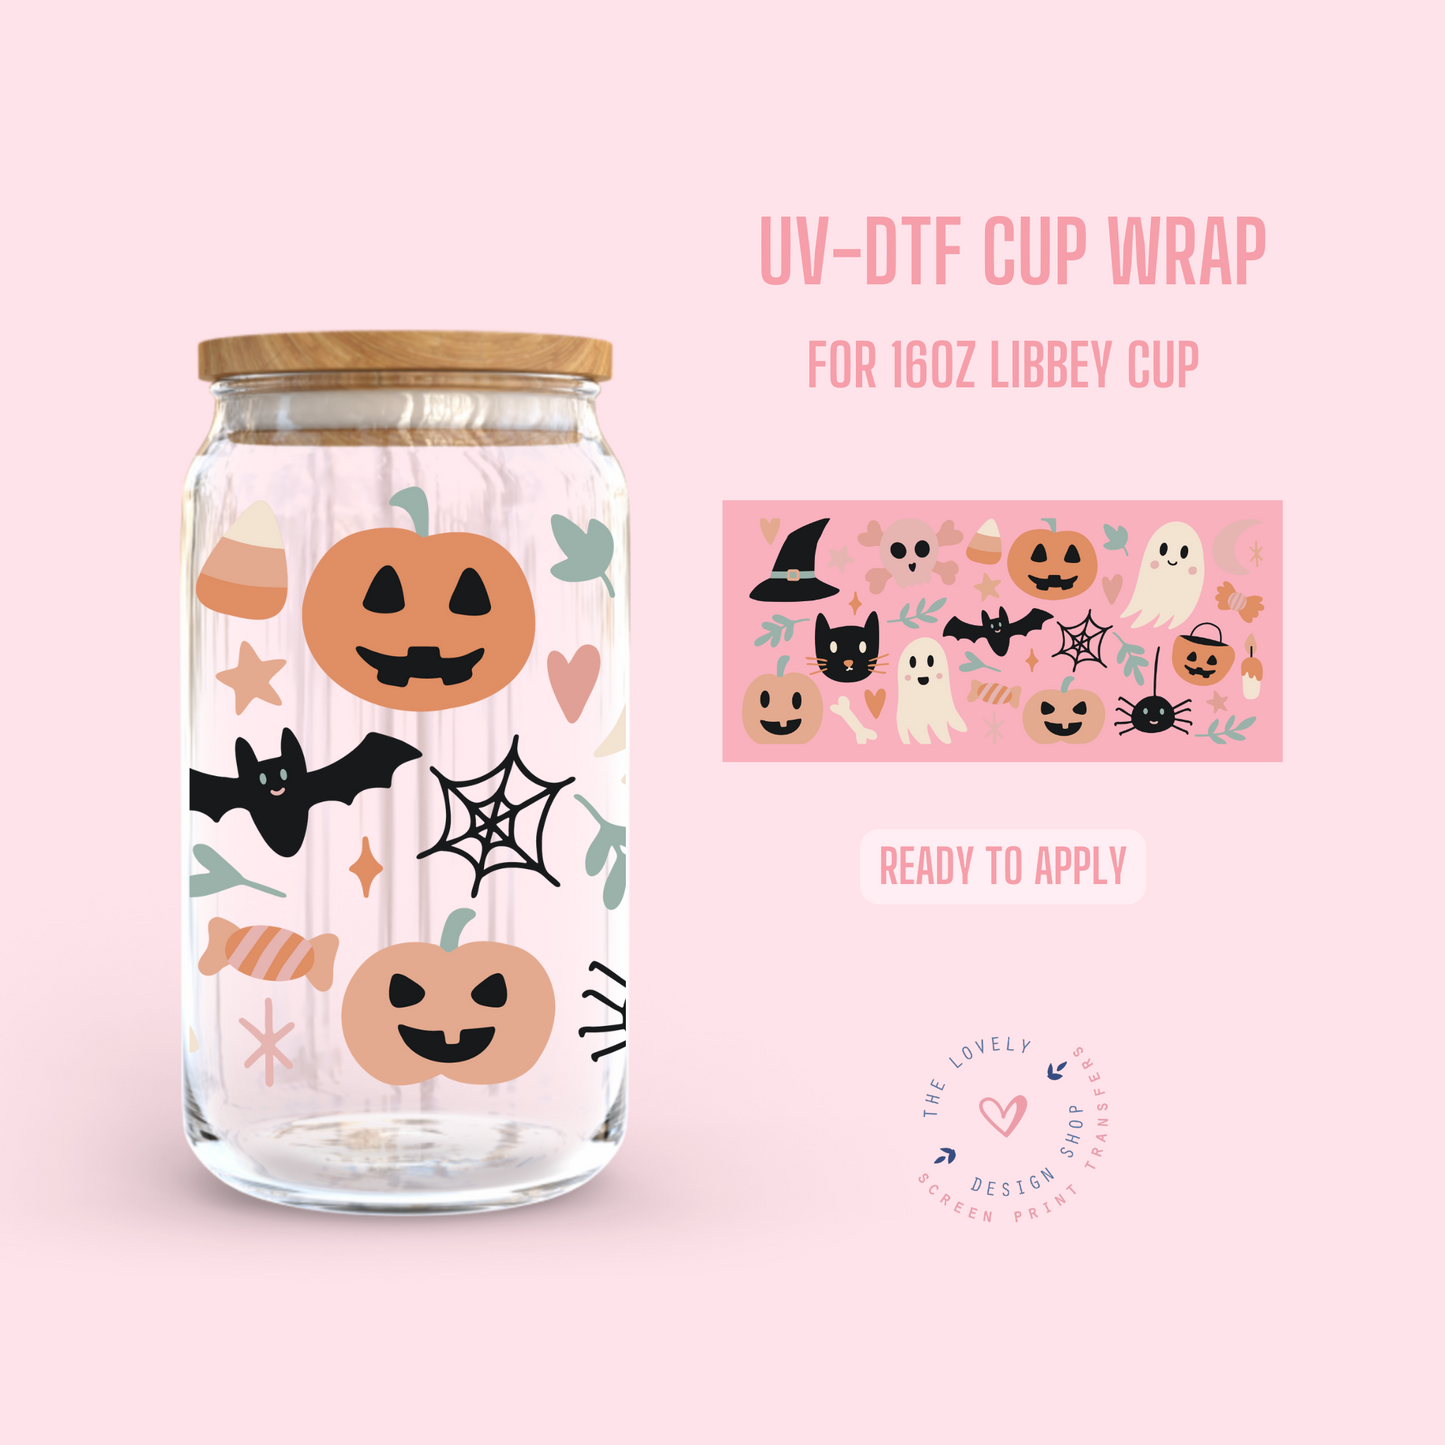 Cute Halloween Drawings - UV DTF 16 oz Libbey Cup Wrap (Ready to Ship)